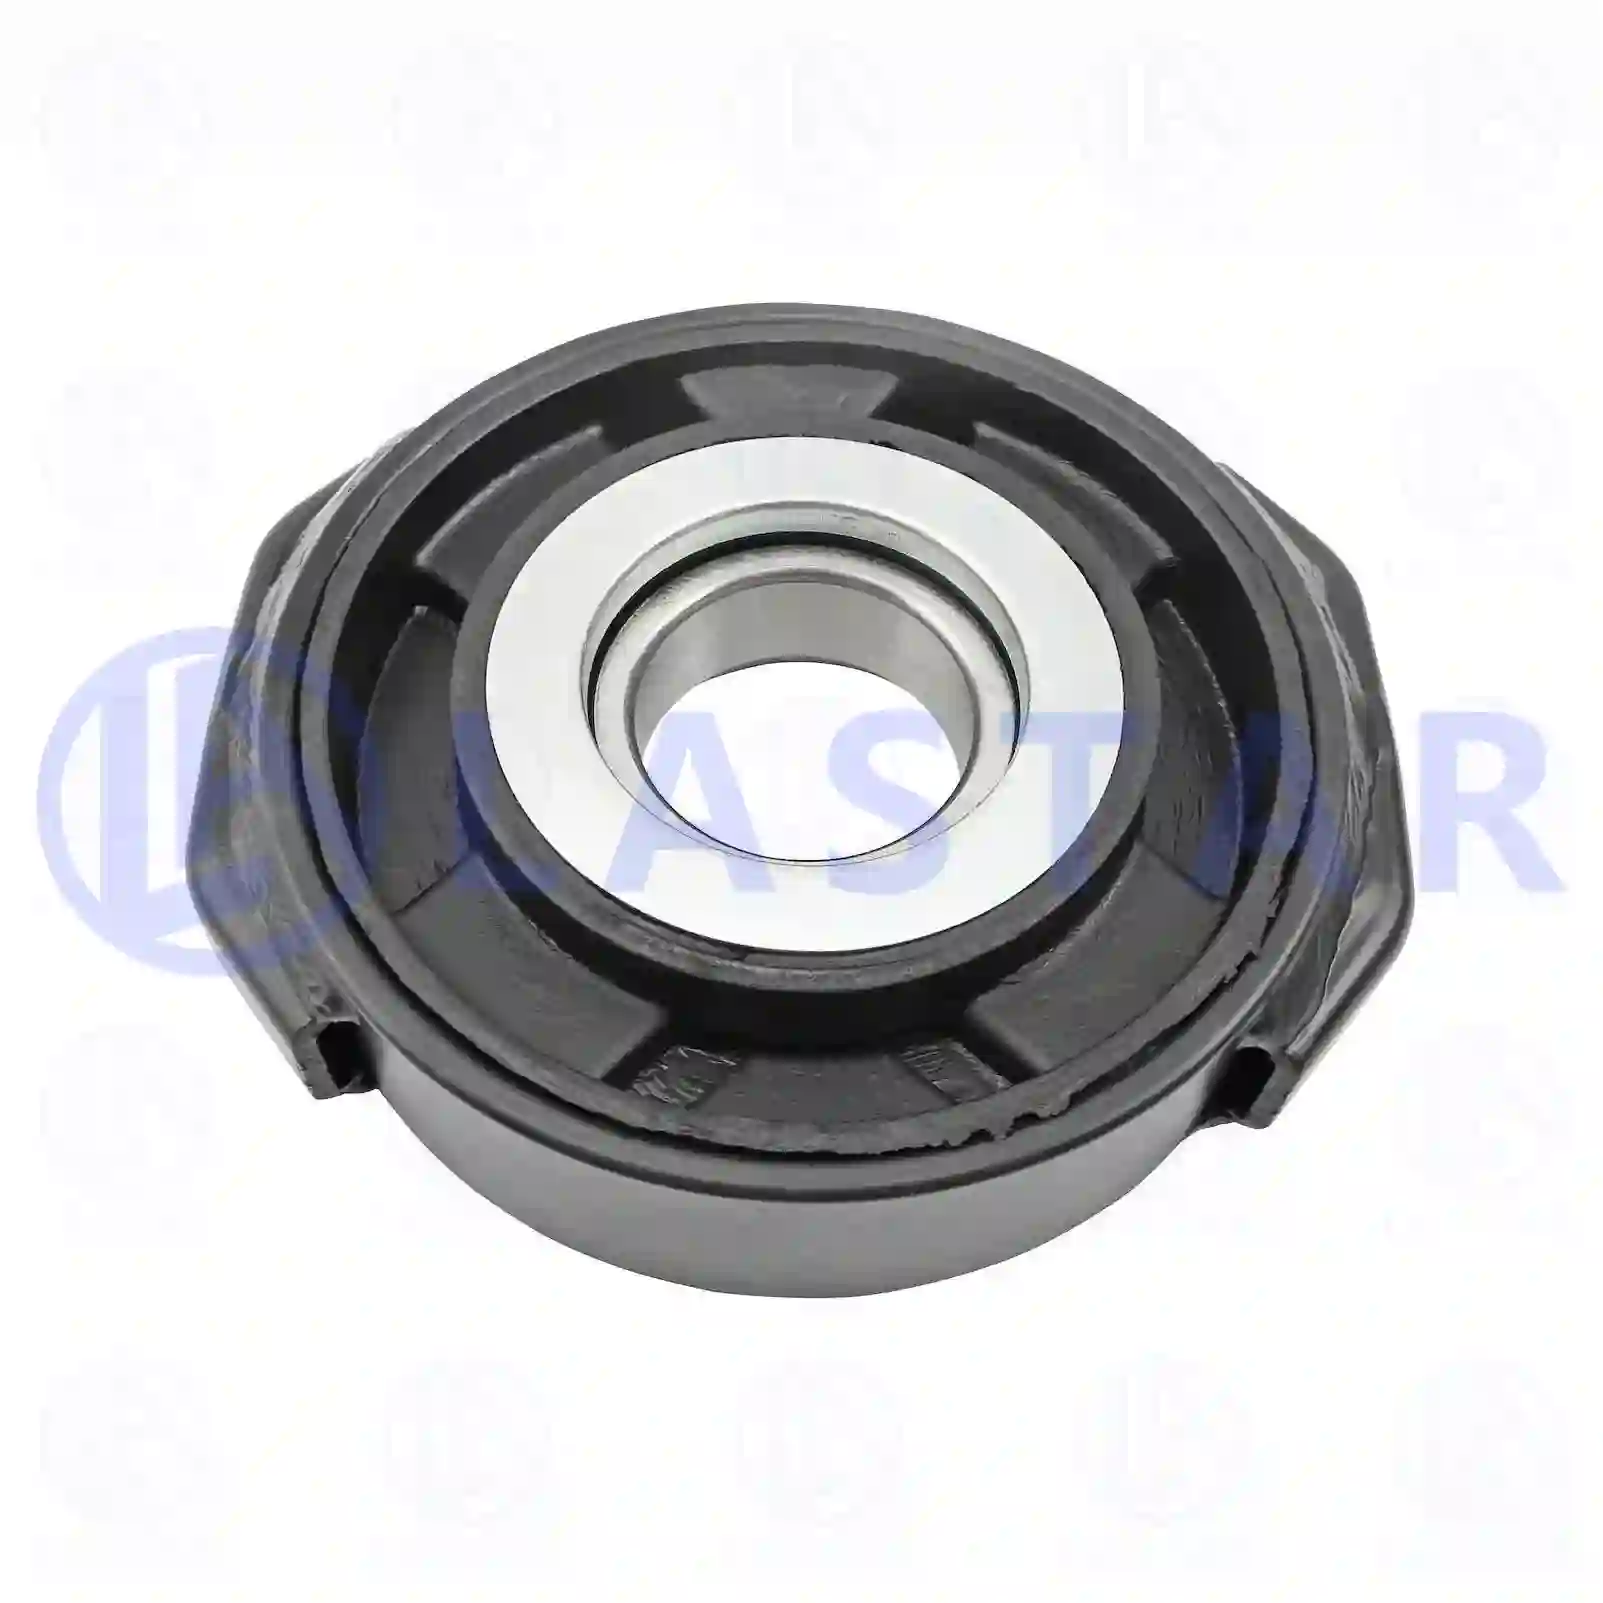 Support Bearing Center bearing, la no: 77734255 ,  oem no:9734100022 Lastar Spare Part | Truck Spare Parts, Auotomotive Spare Parts